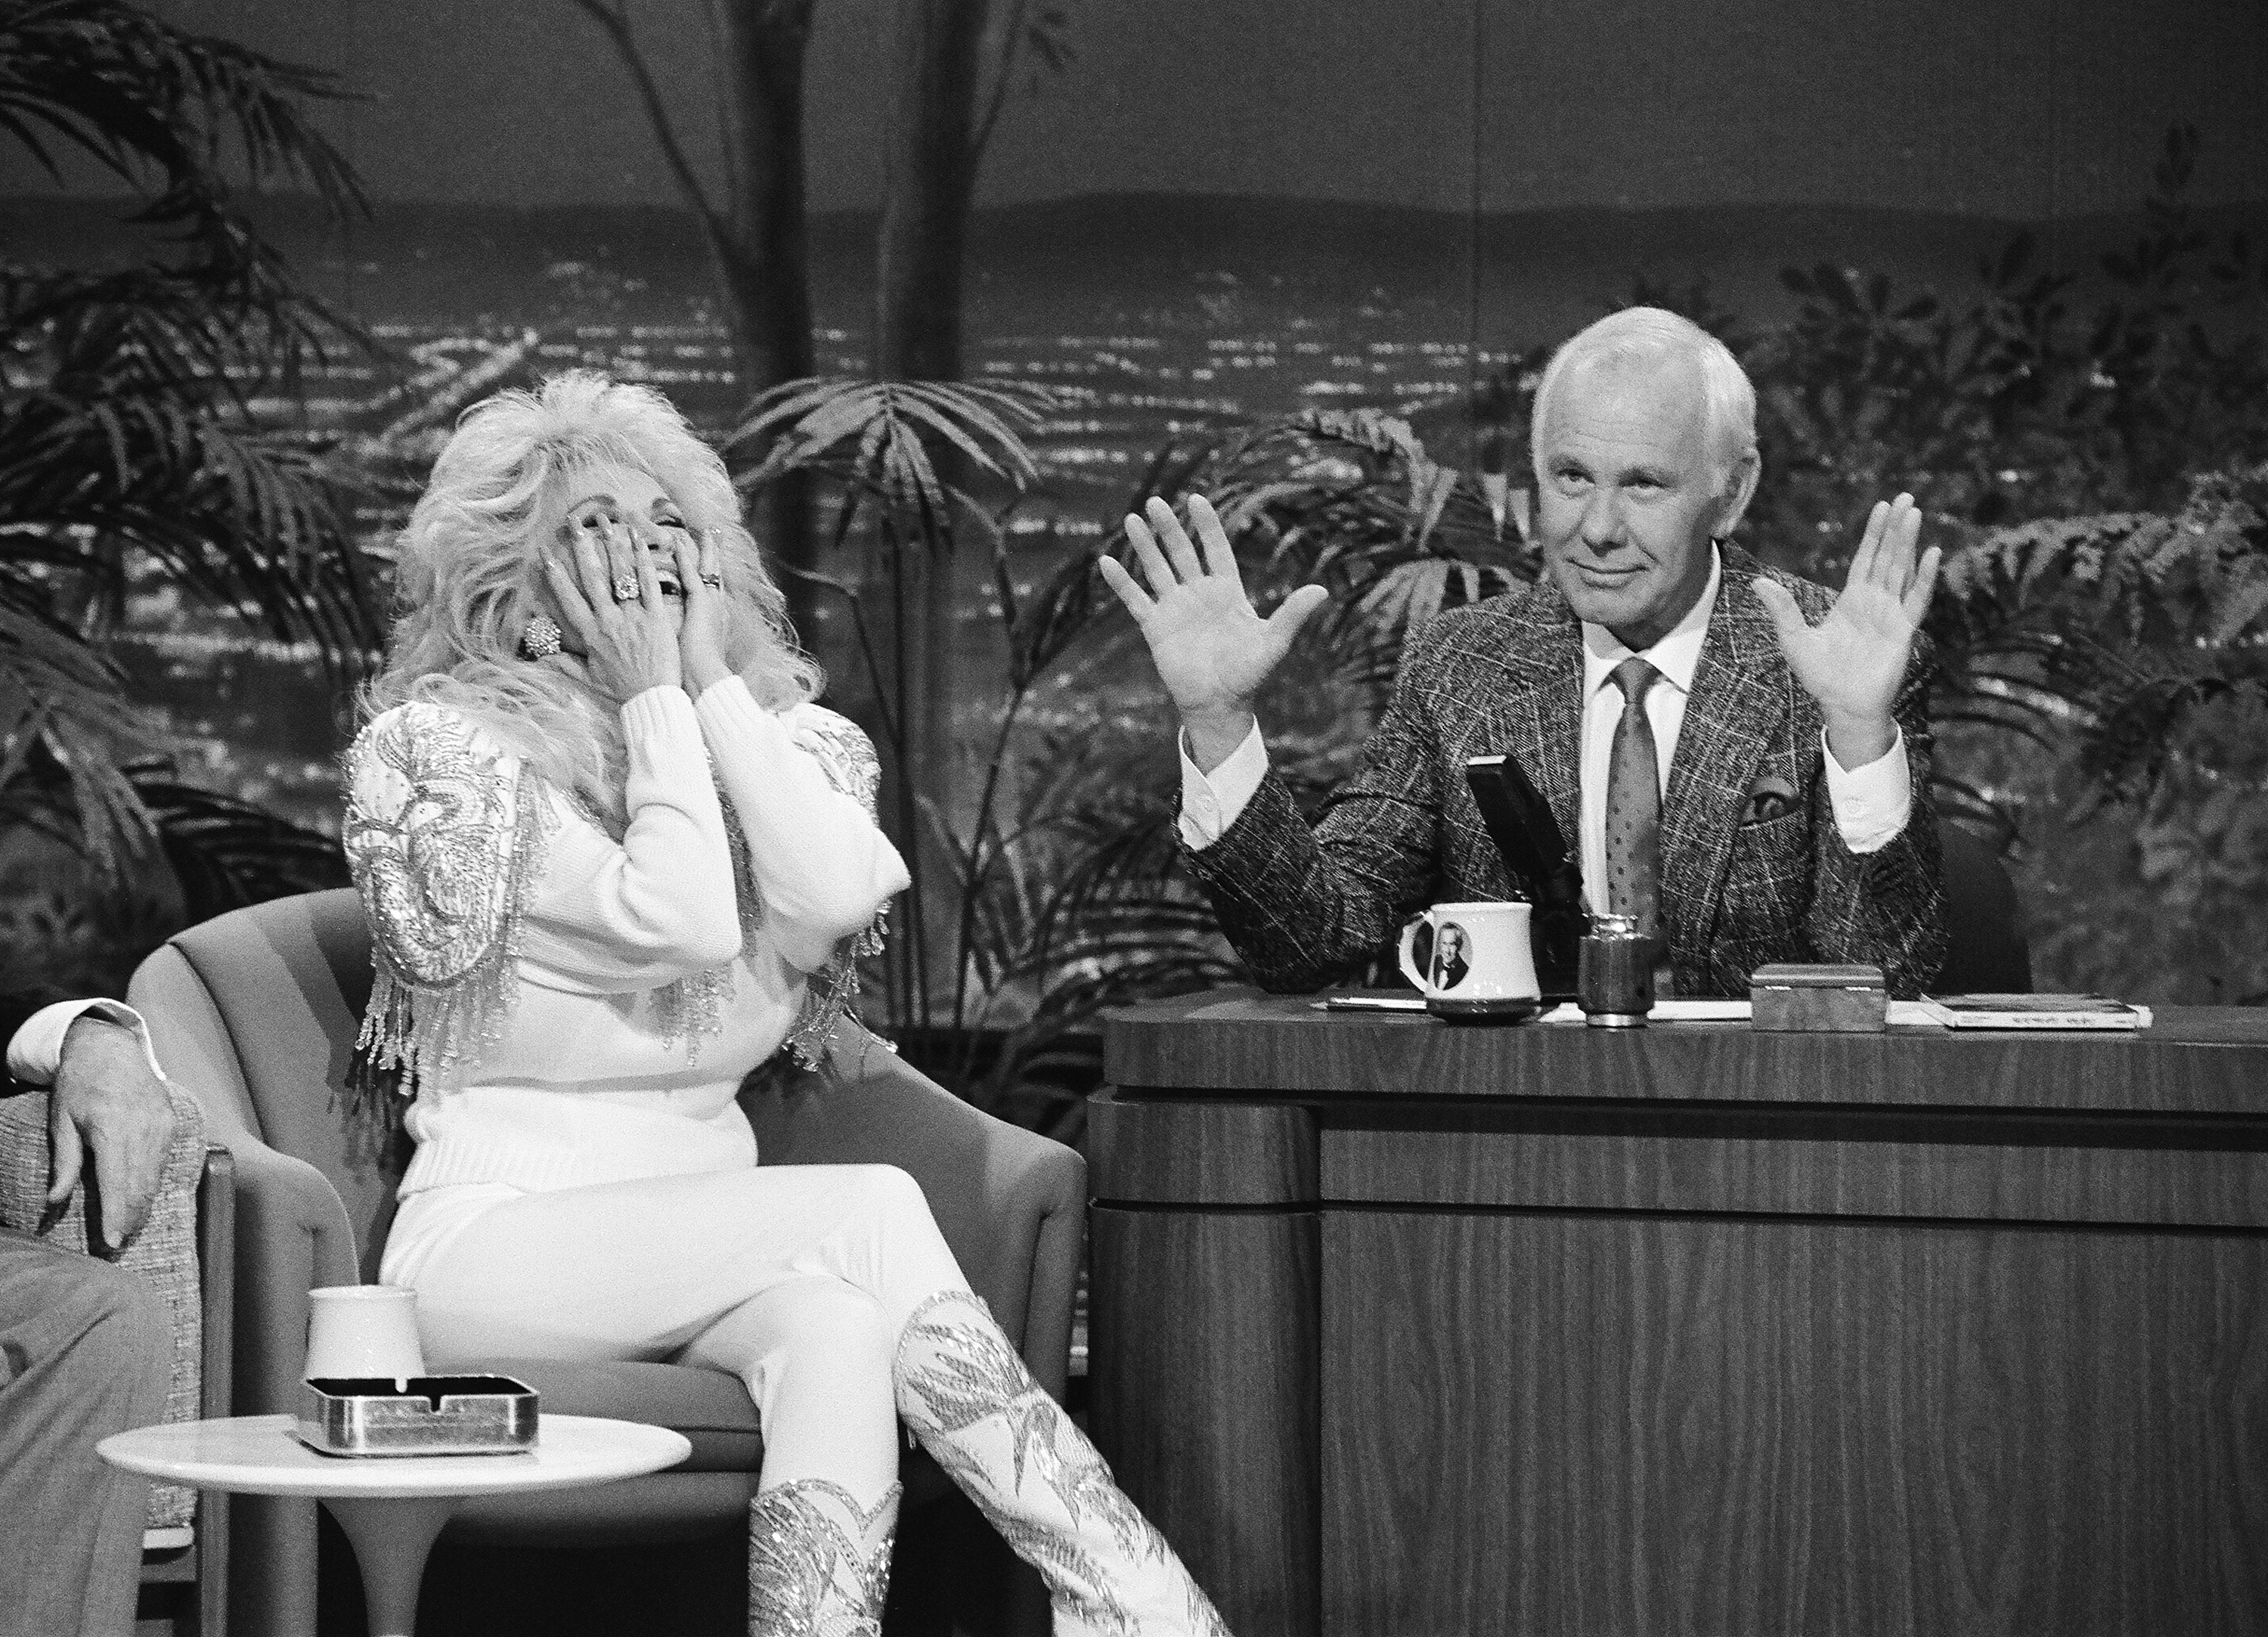 Dolly Parton during an interview with host Johnny Carson on 'The Tonight Show' on May 8, 1991.